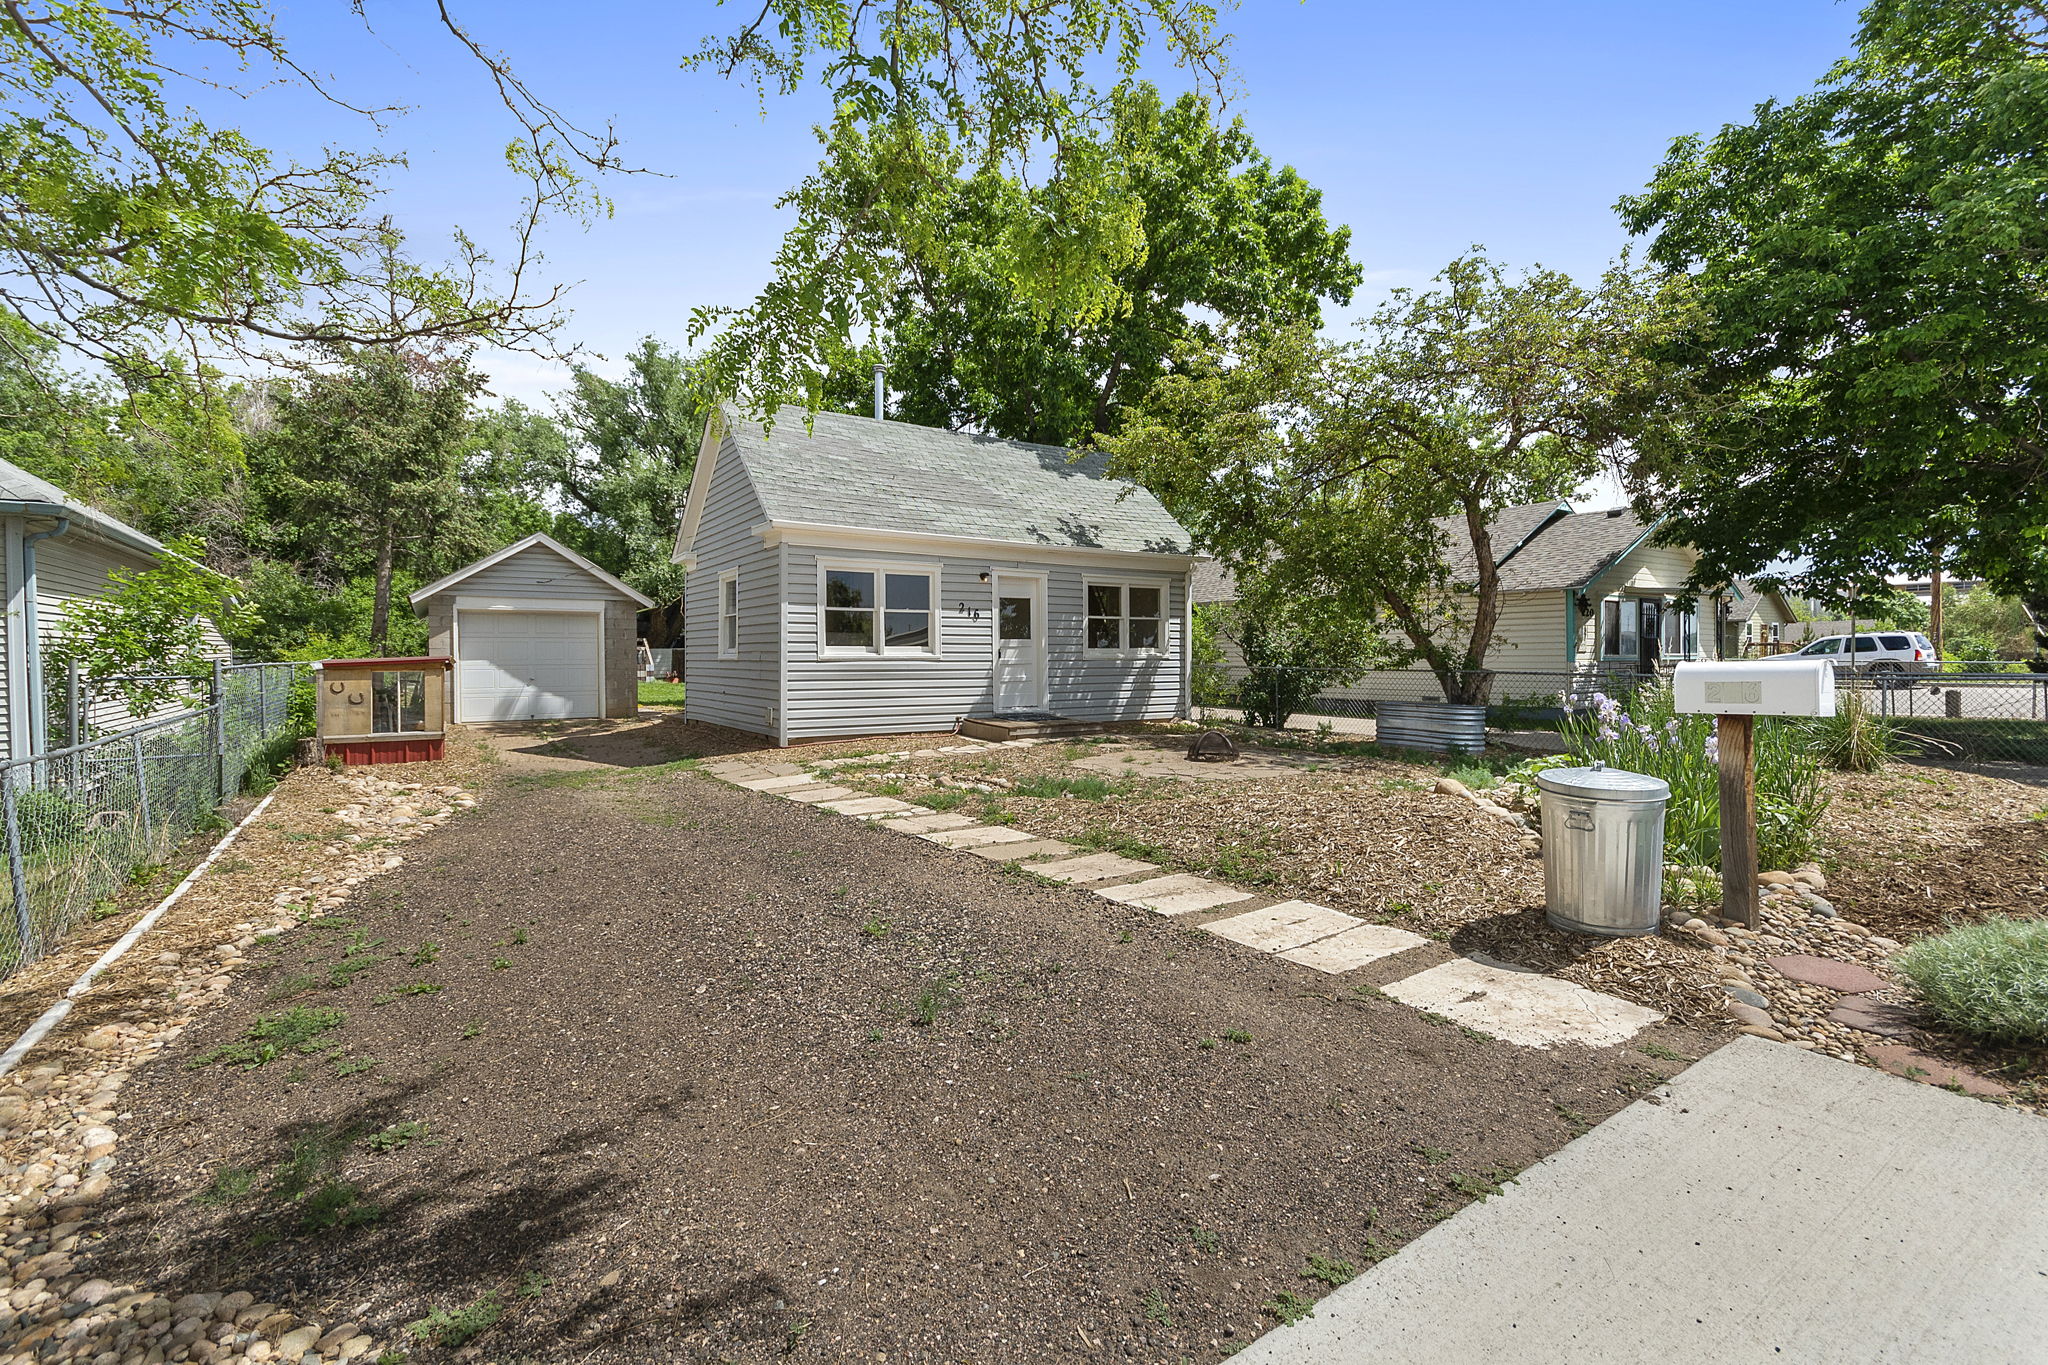  216 Lincoln St, Fort Collins, CO 80524, US Photo 3